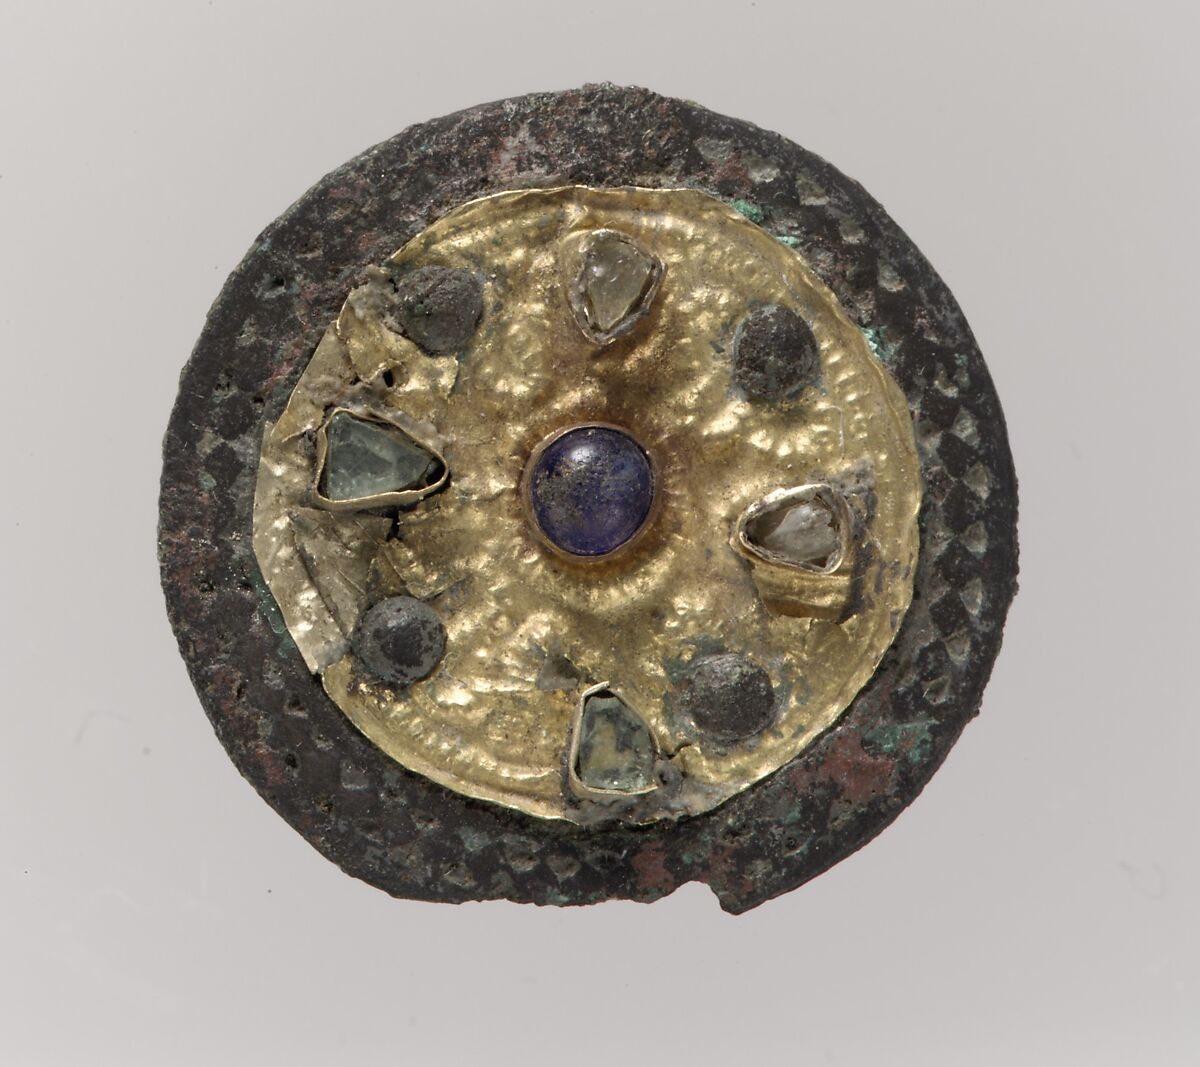 Disk Brooch, Gold, glass, copper alloy, glass paste cabochons, Frankish 